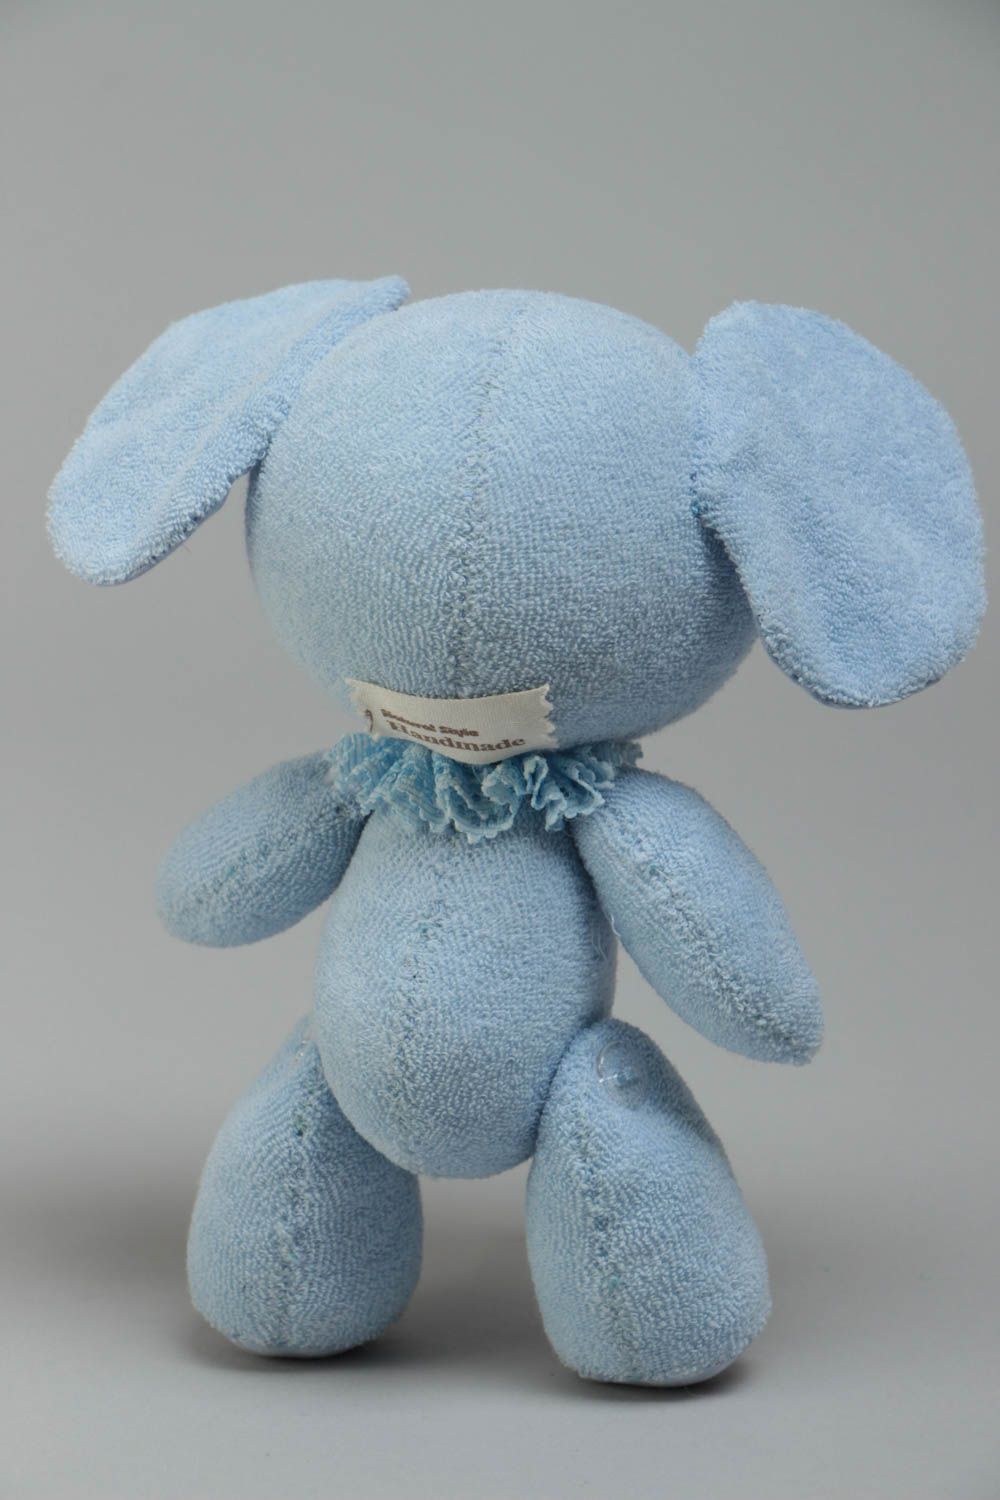 Handmade soft toy sewn of jersey and mohair fabric small blue elephant for kids photo 4